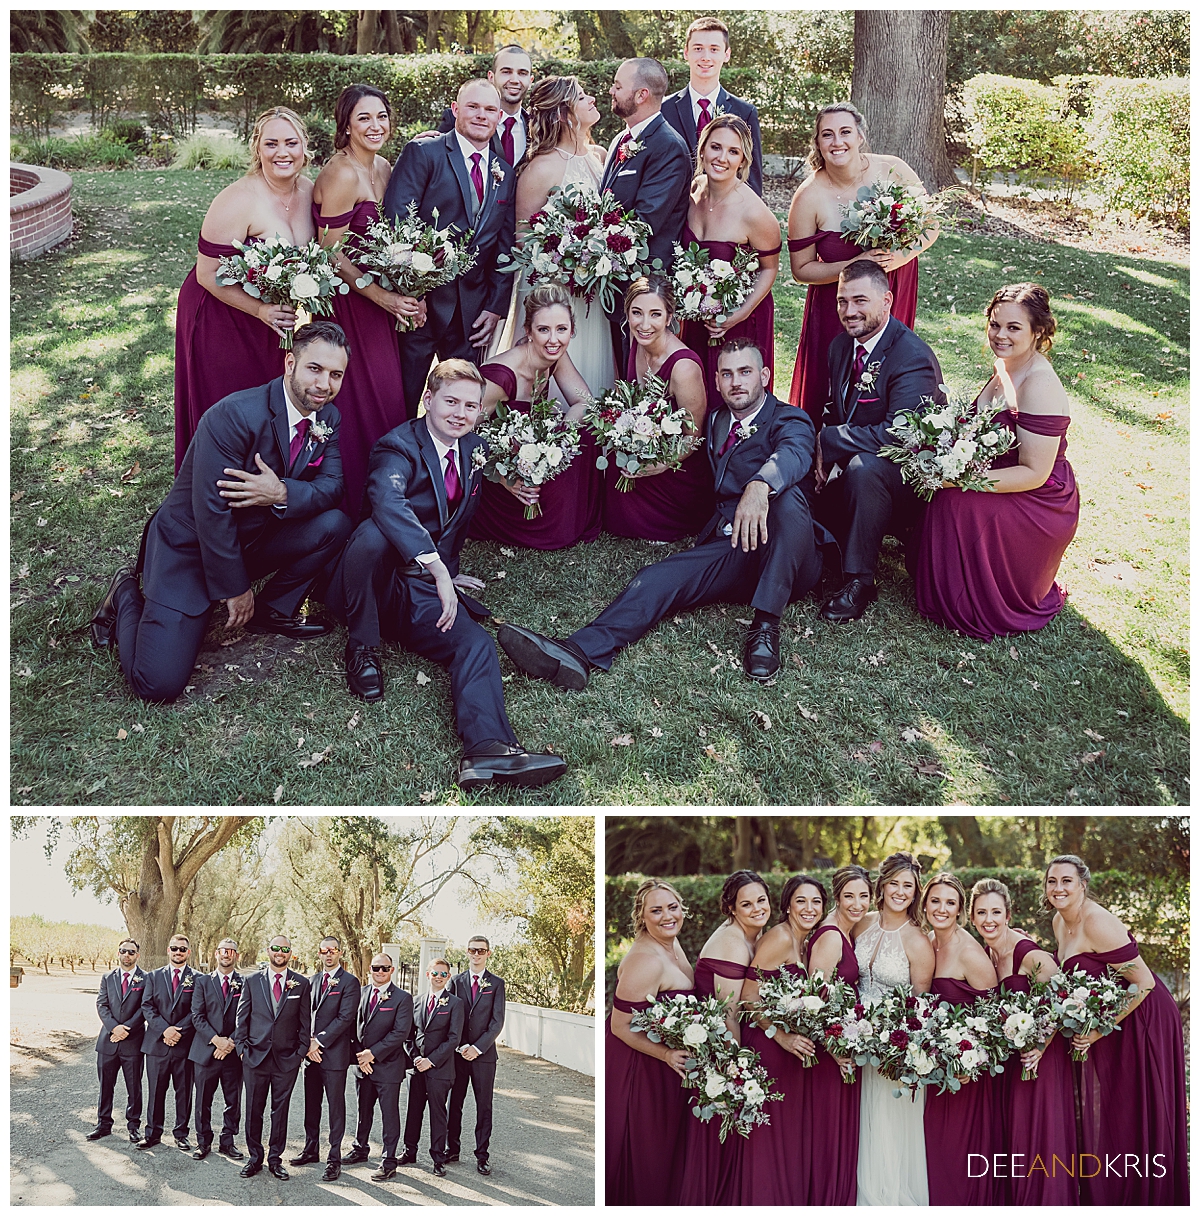 Three images of formal wedding party poses.